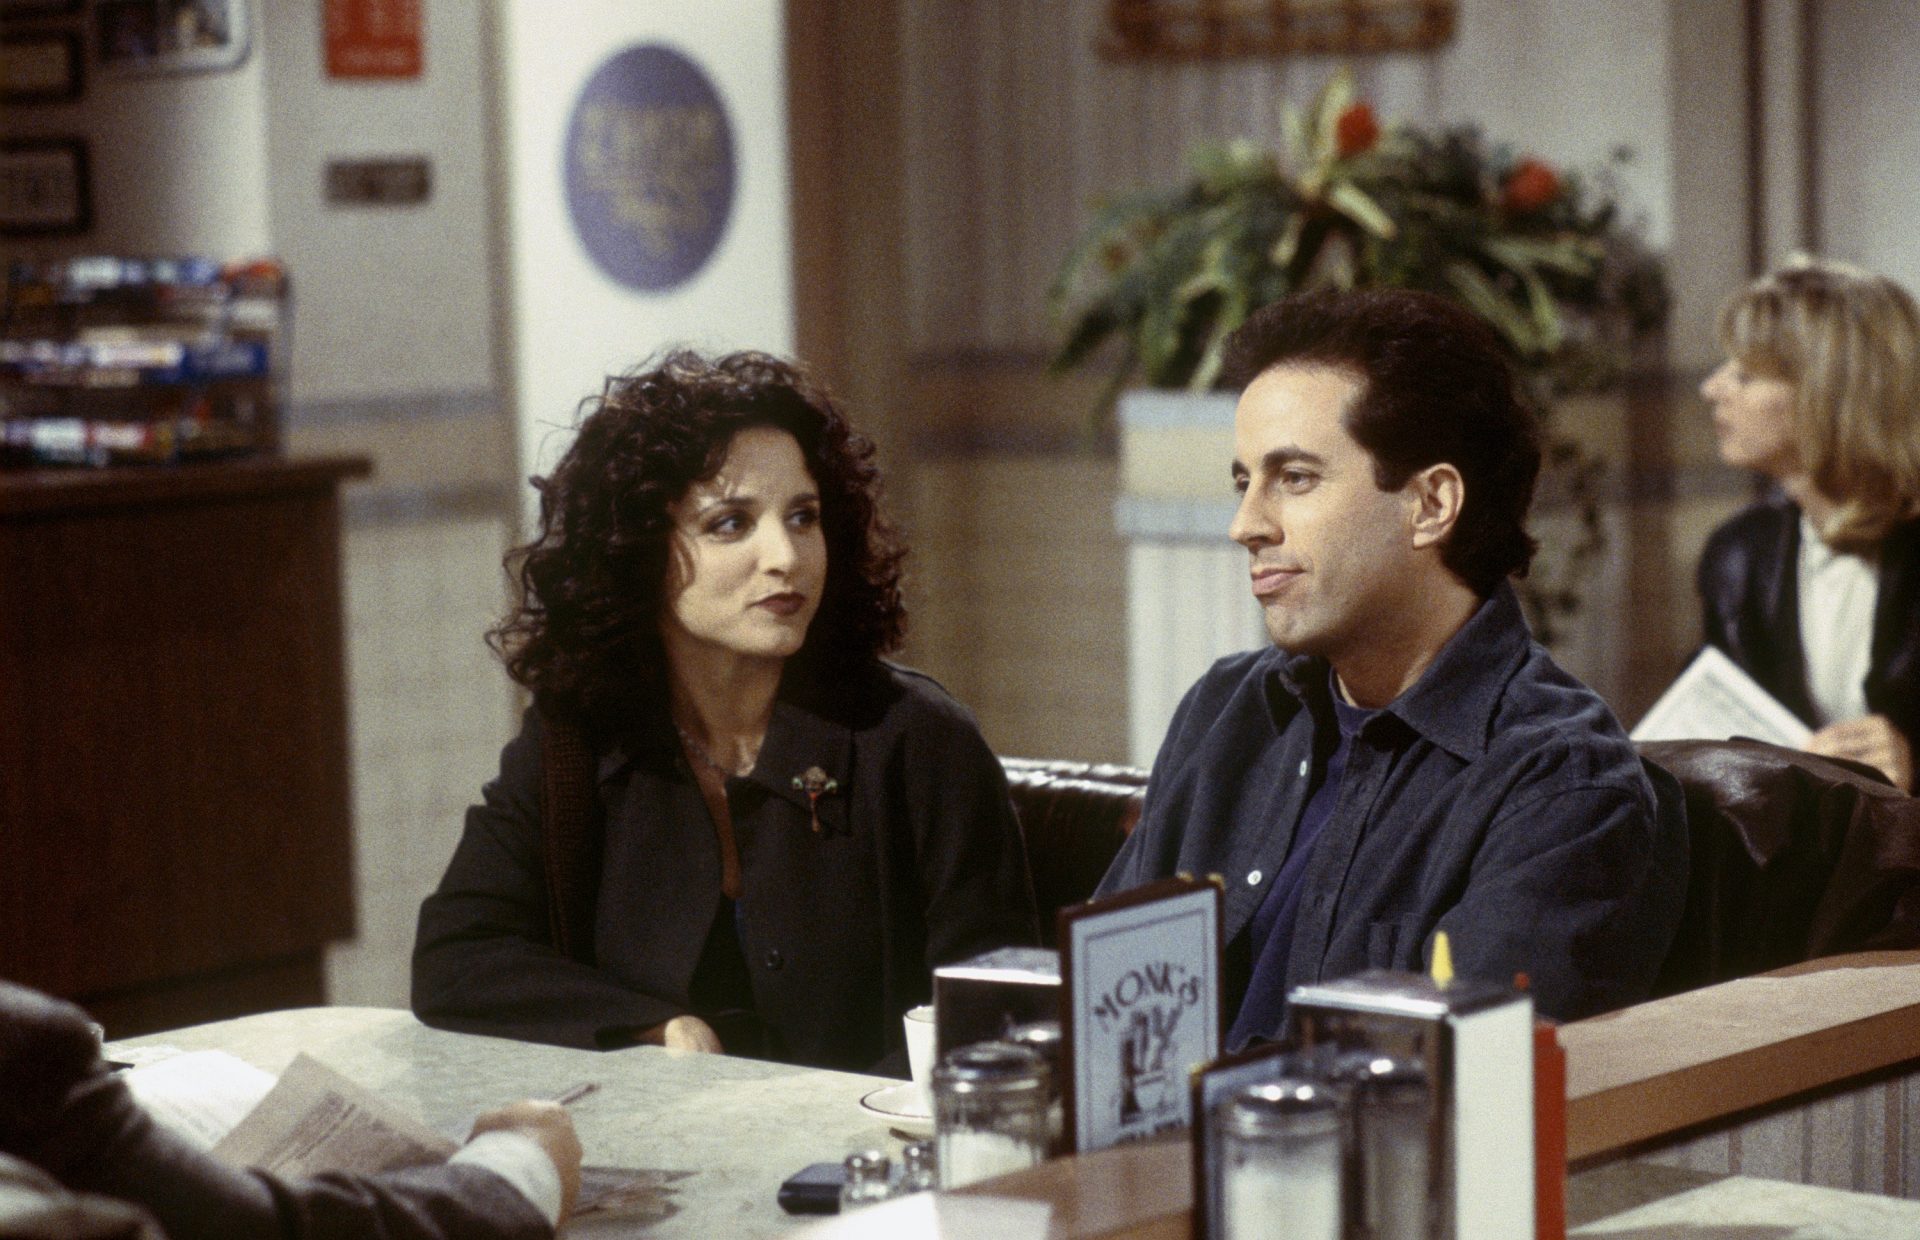 ‘Seinfeld’ might well now no longer be available to circulation for months